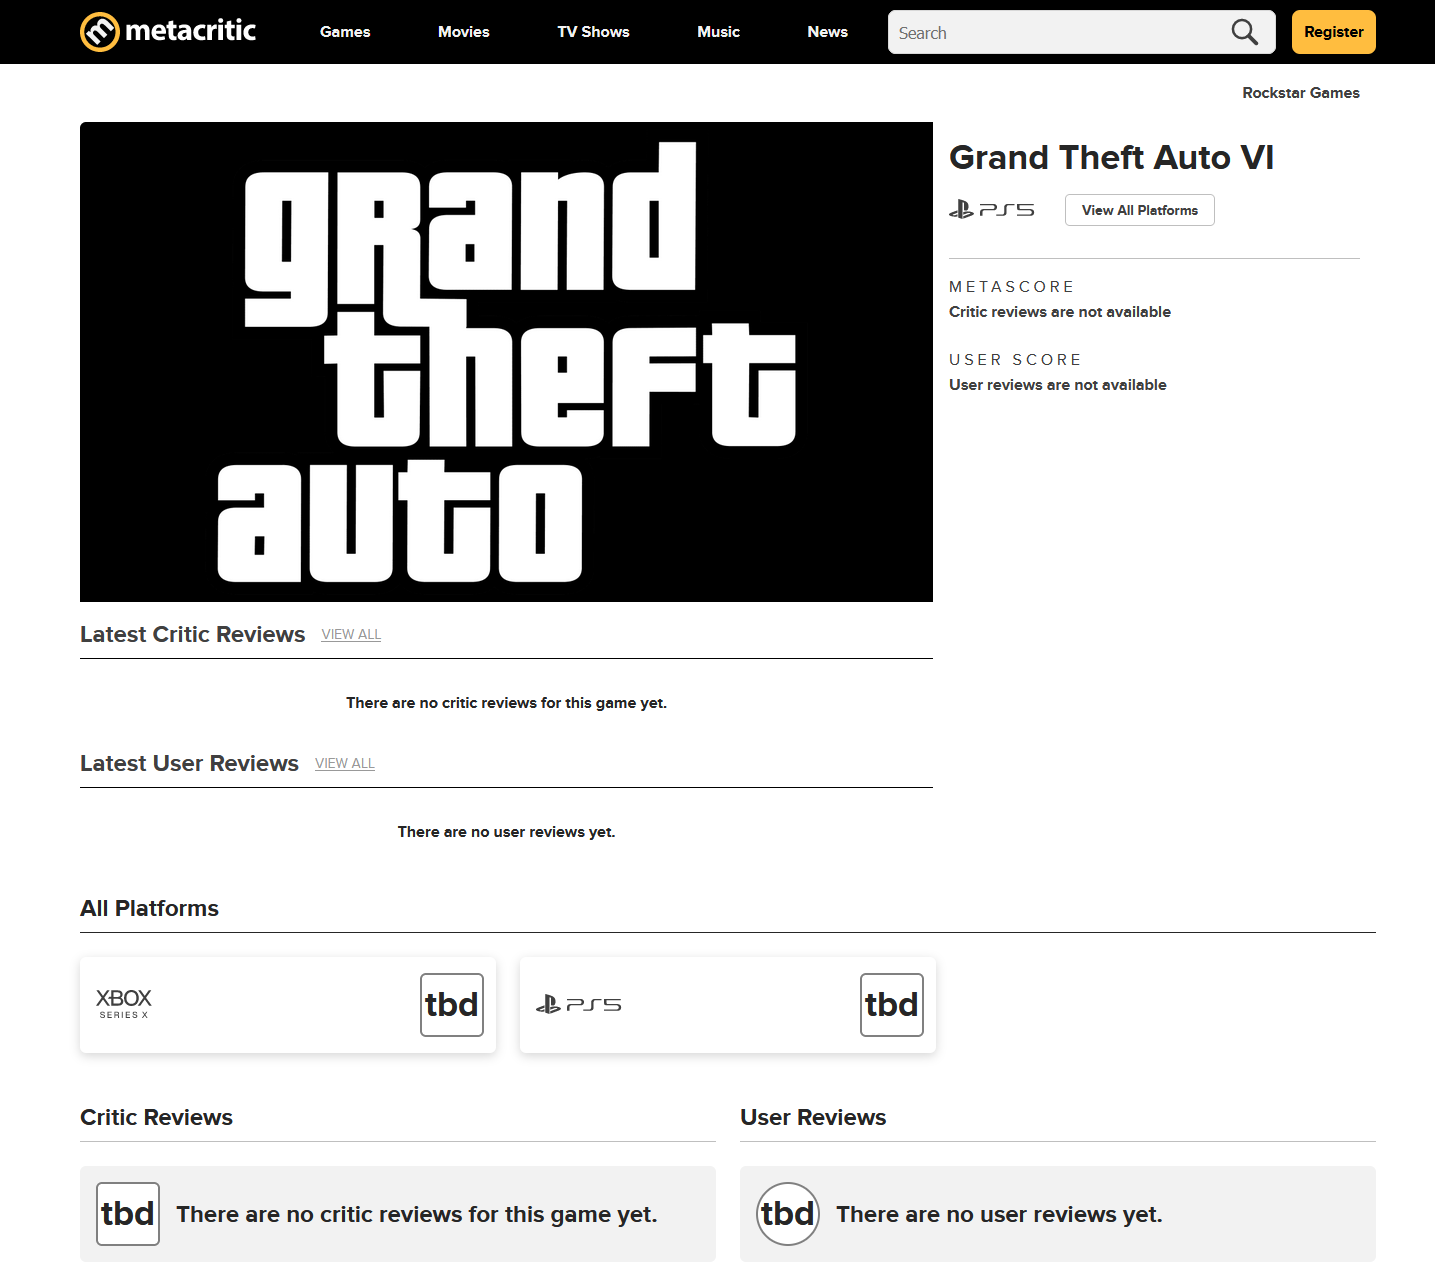 GTA 6 page appears on Metacritic – no mention of PC in platforms
Latest